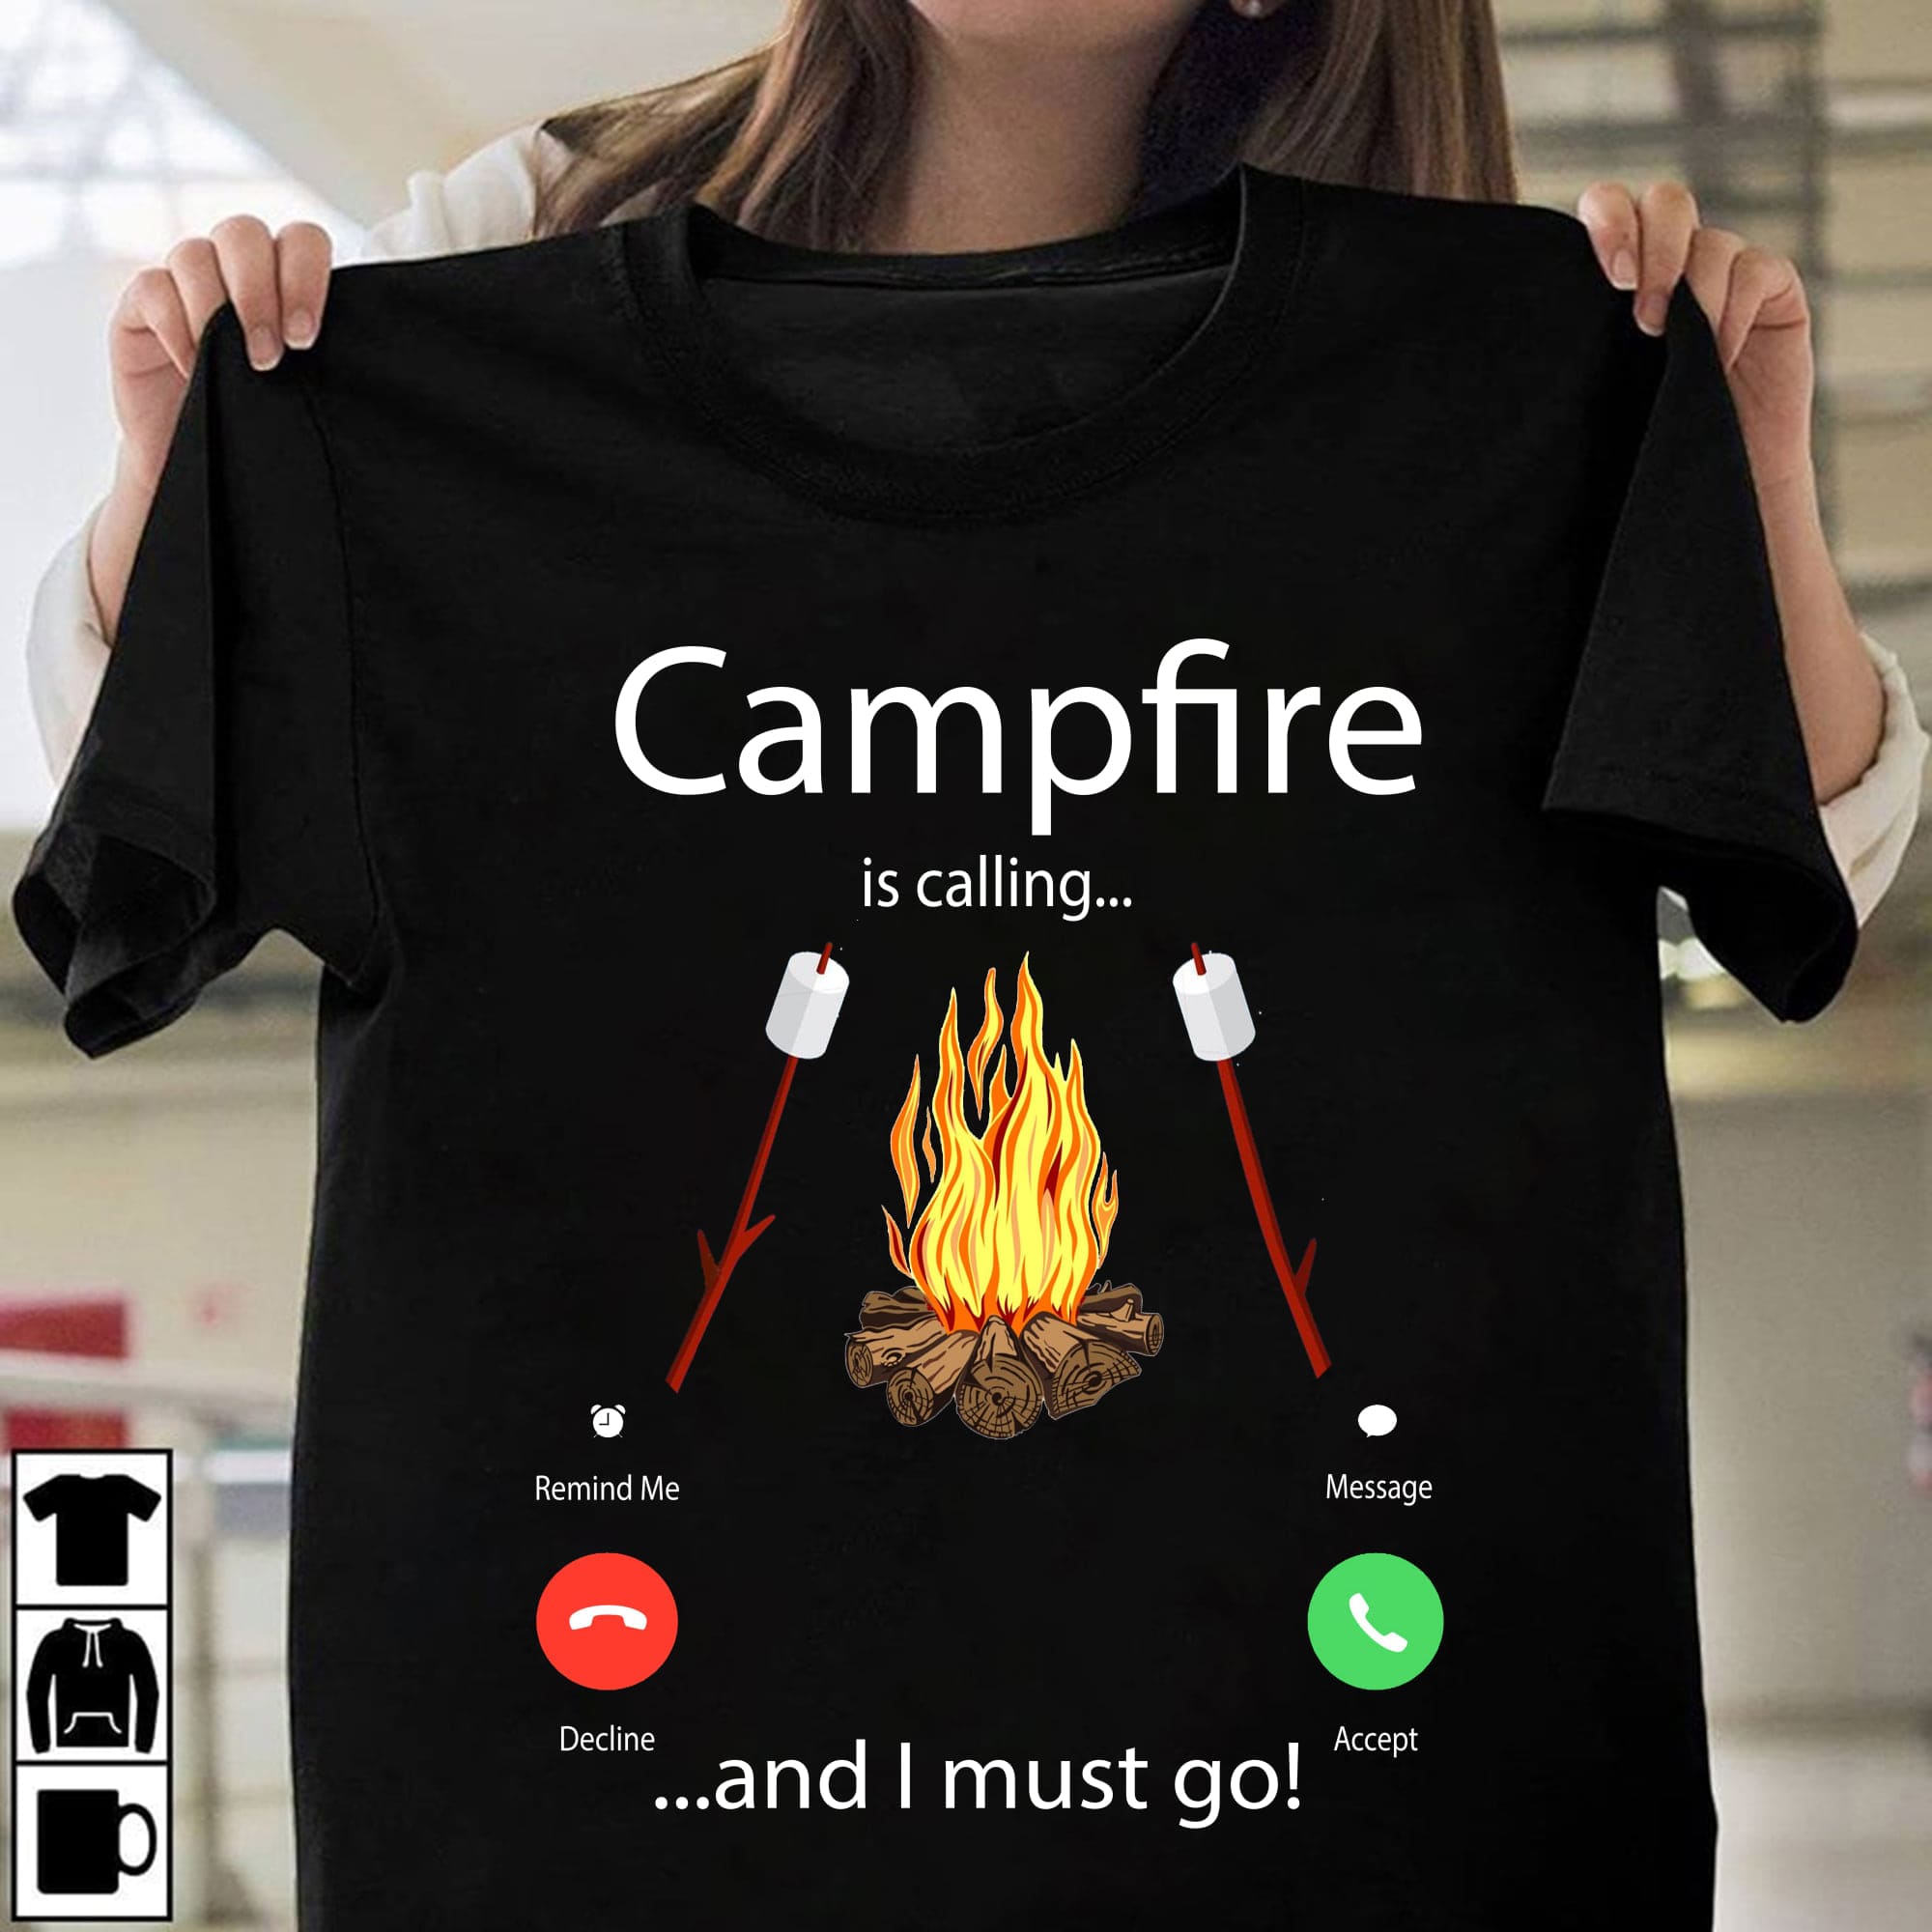 Campfire is calling and I must go - Campfire graphic T-shirt, love to go camping